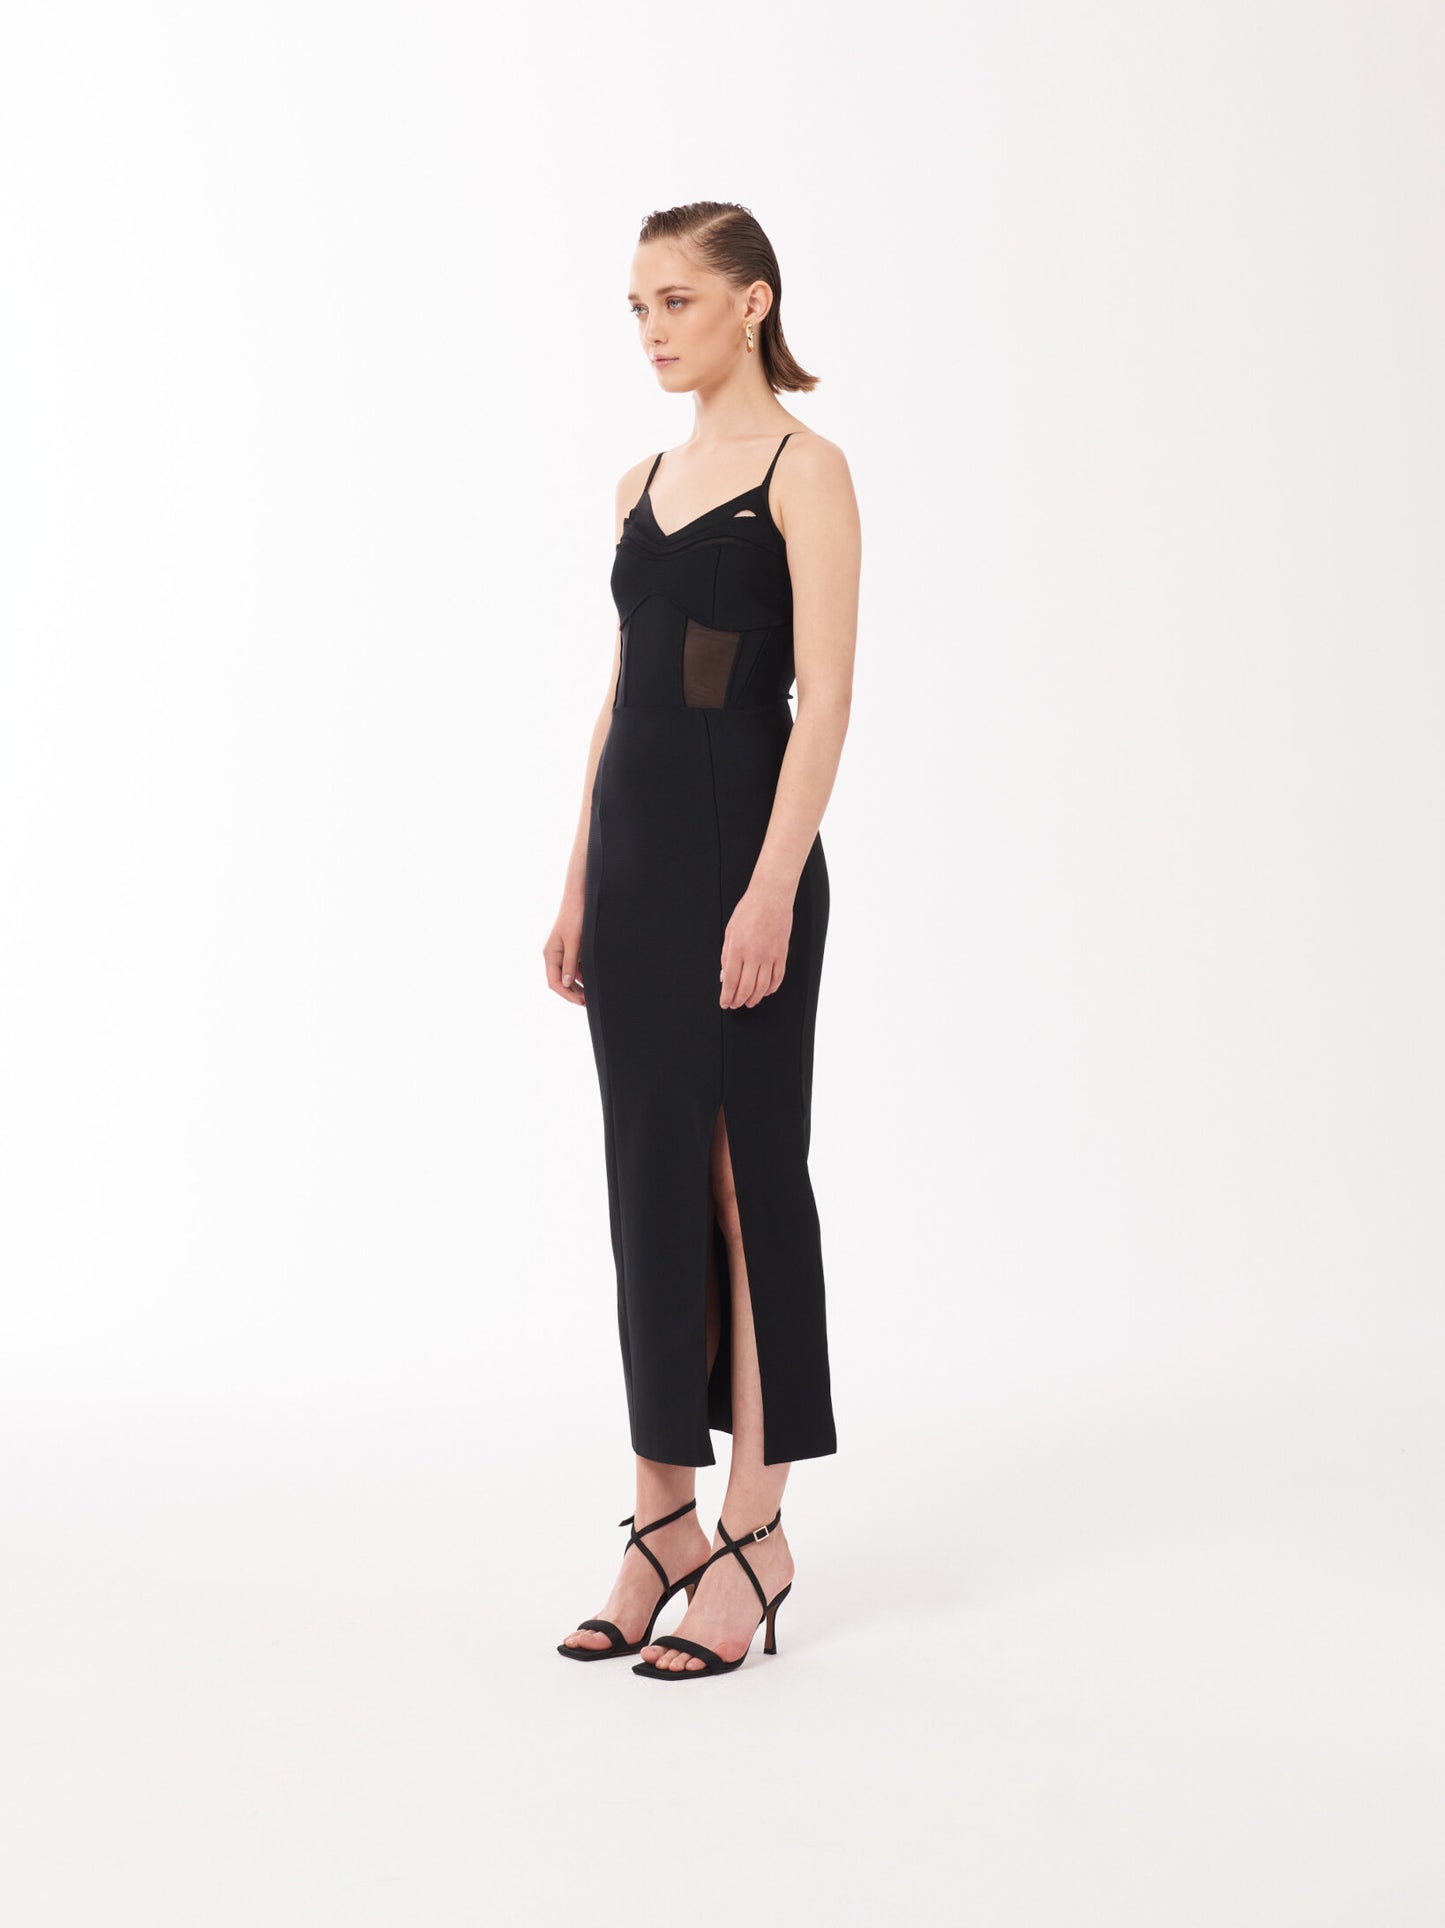 Black Corset style Tulle-paneled dress with side slit designed by Sour Figs Fashion